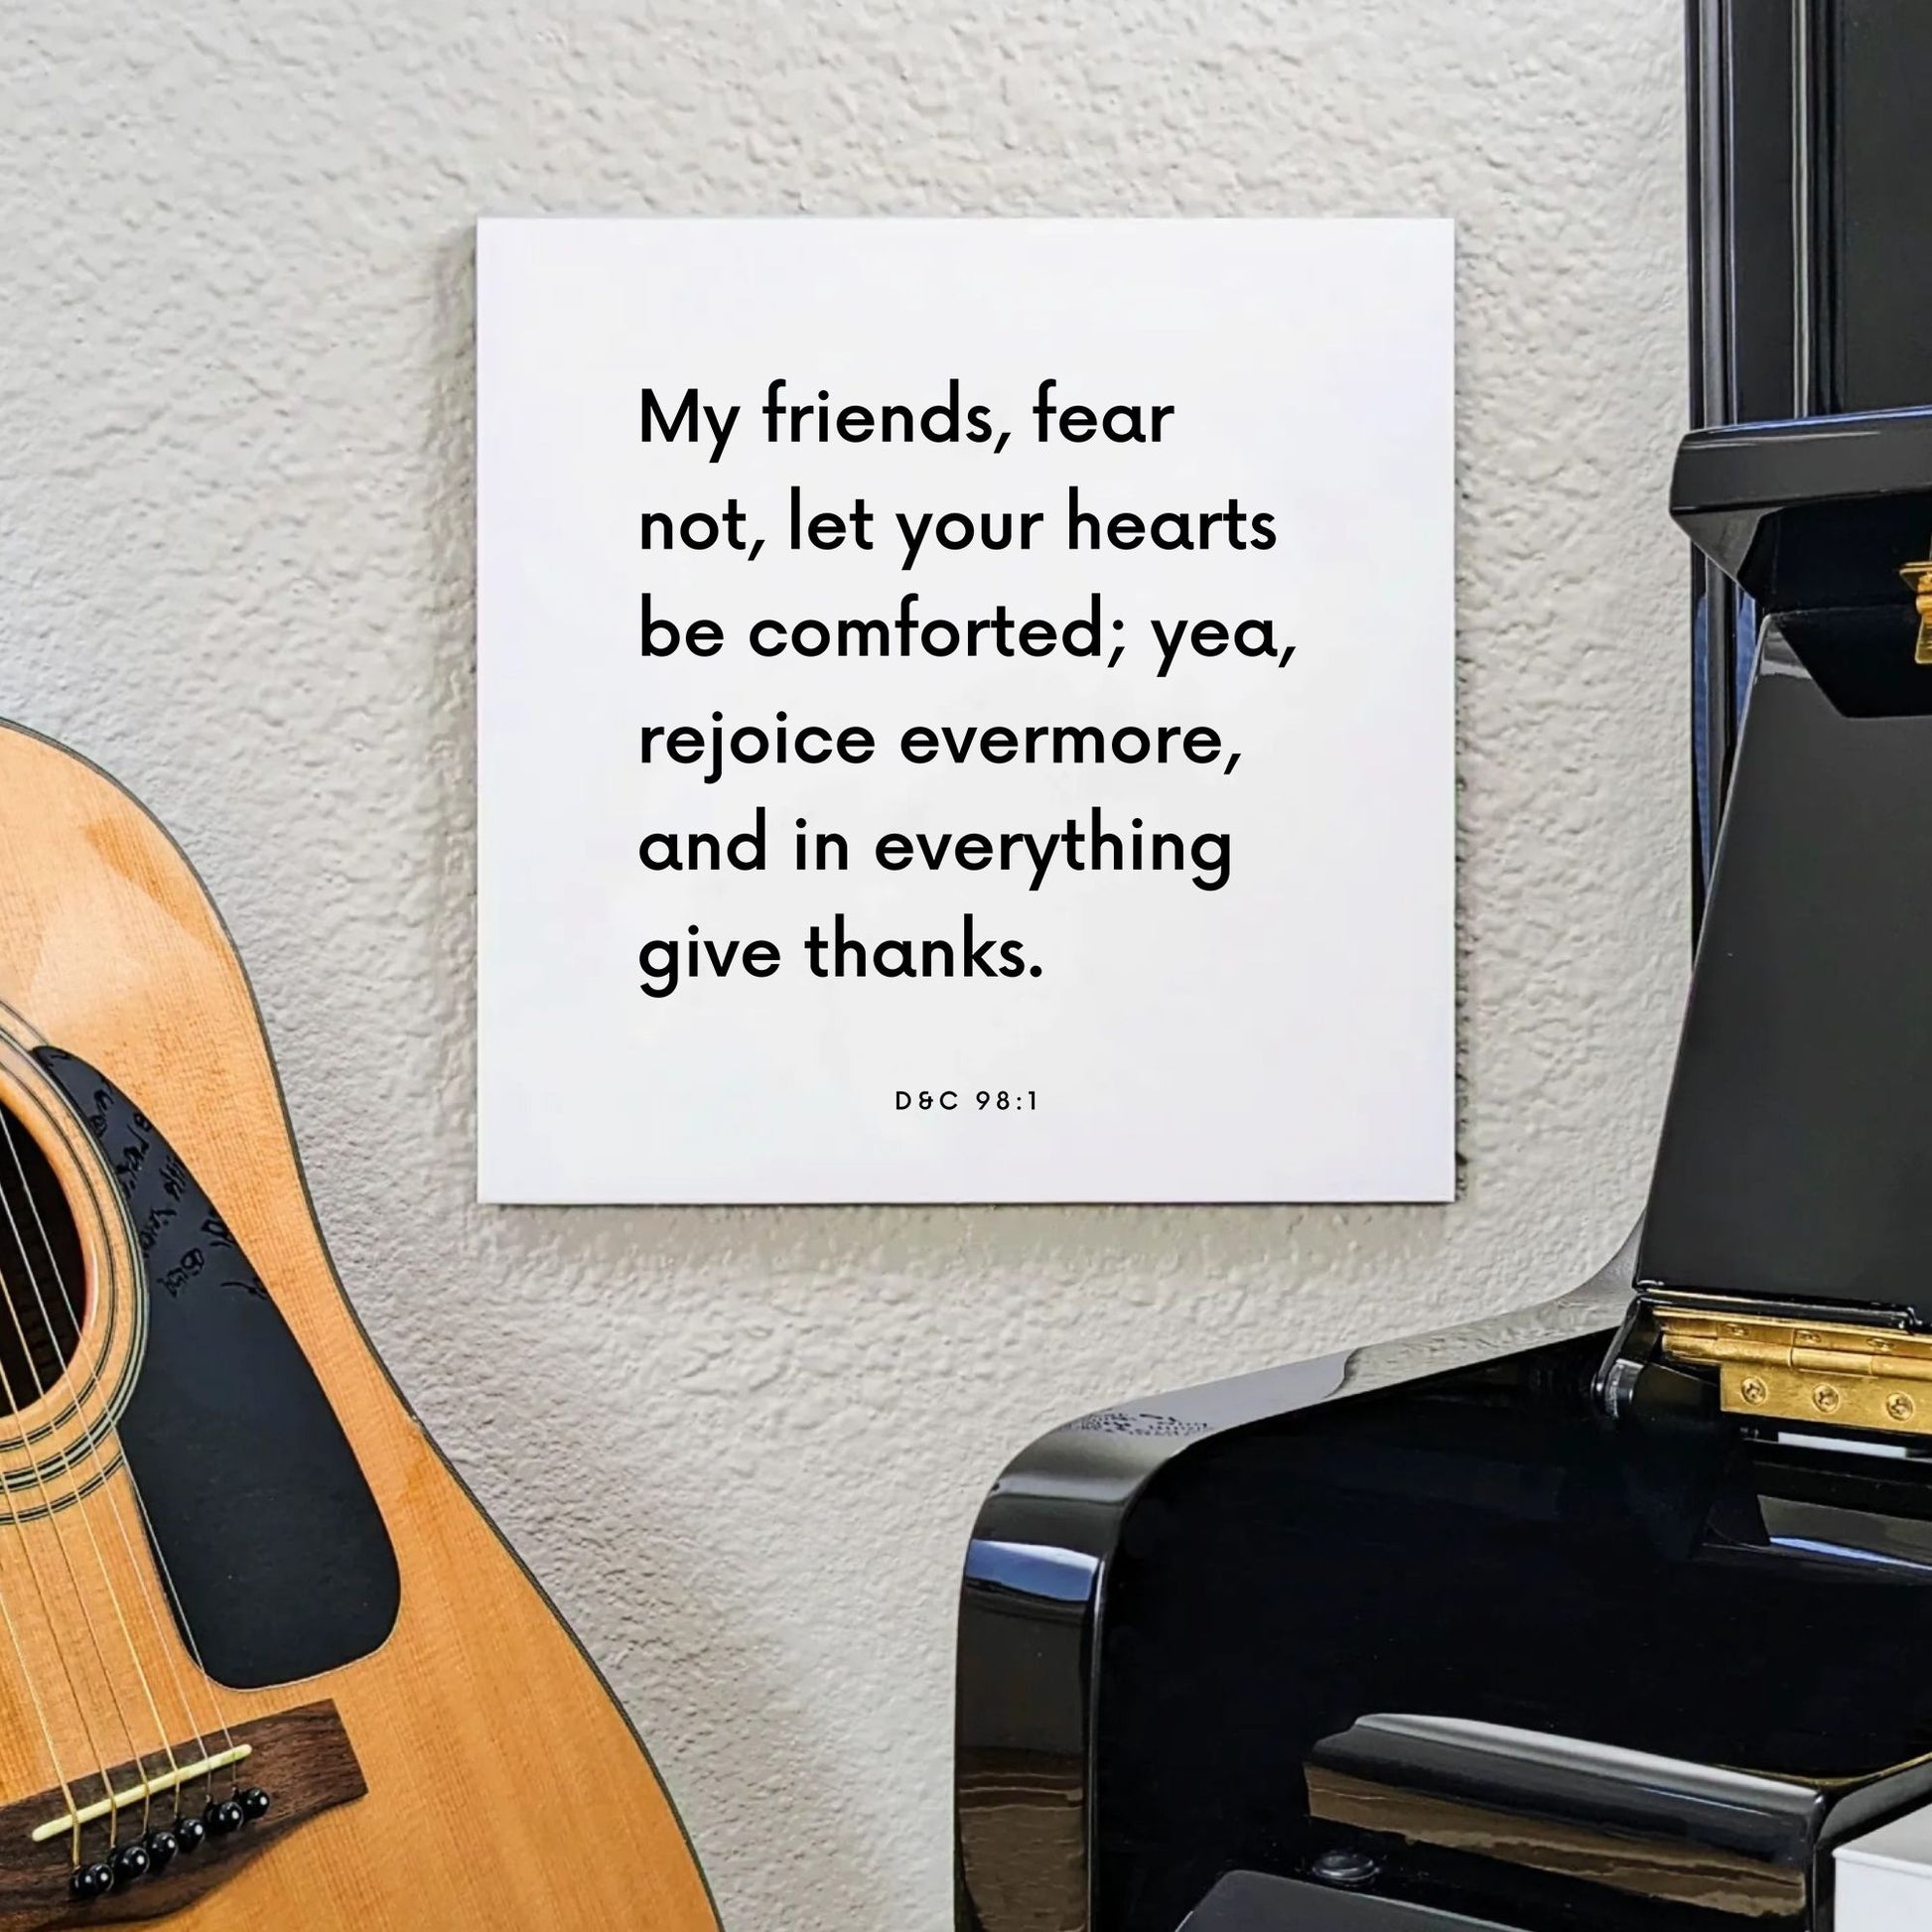 Music mouting of the scripture tile for D&C 98:1 - "My friends, fear not, let your hearts be comforted"